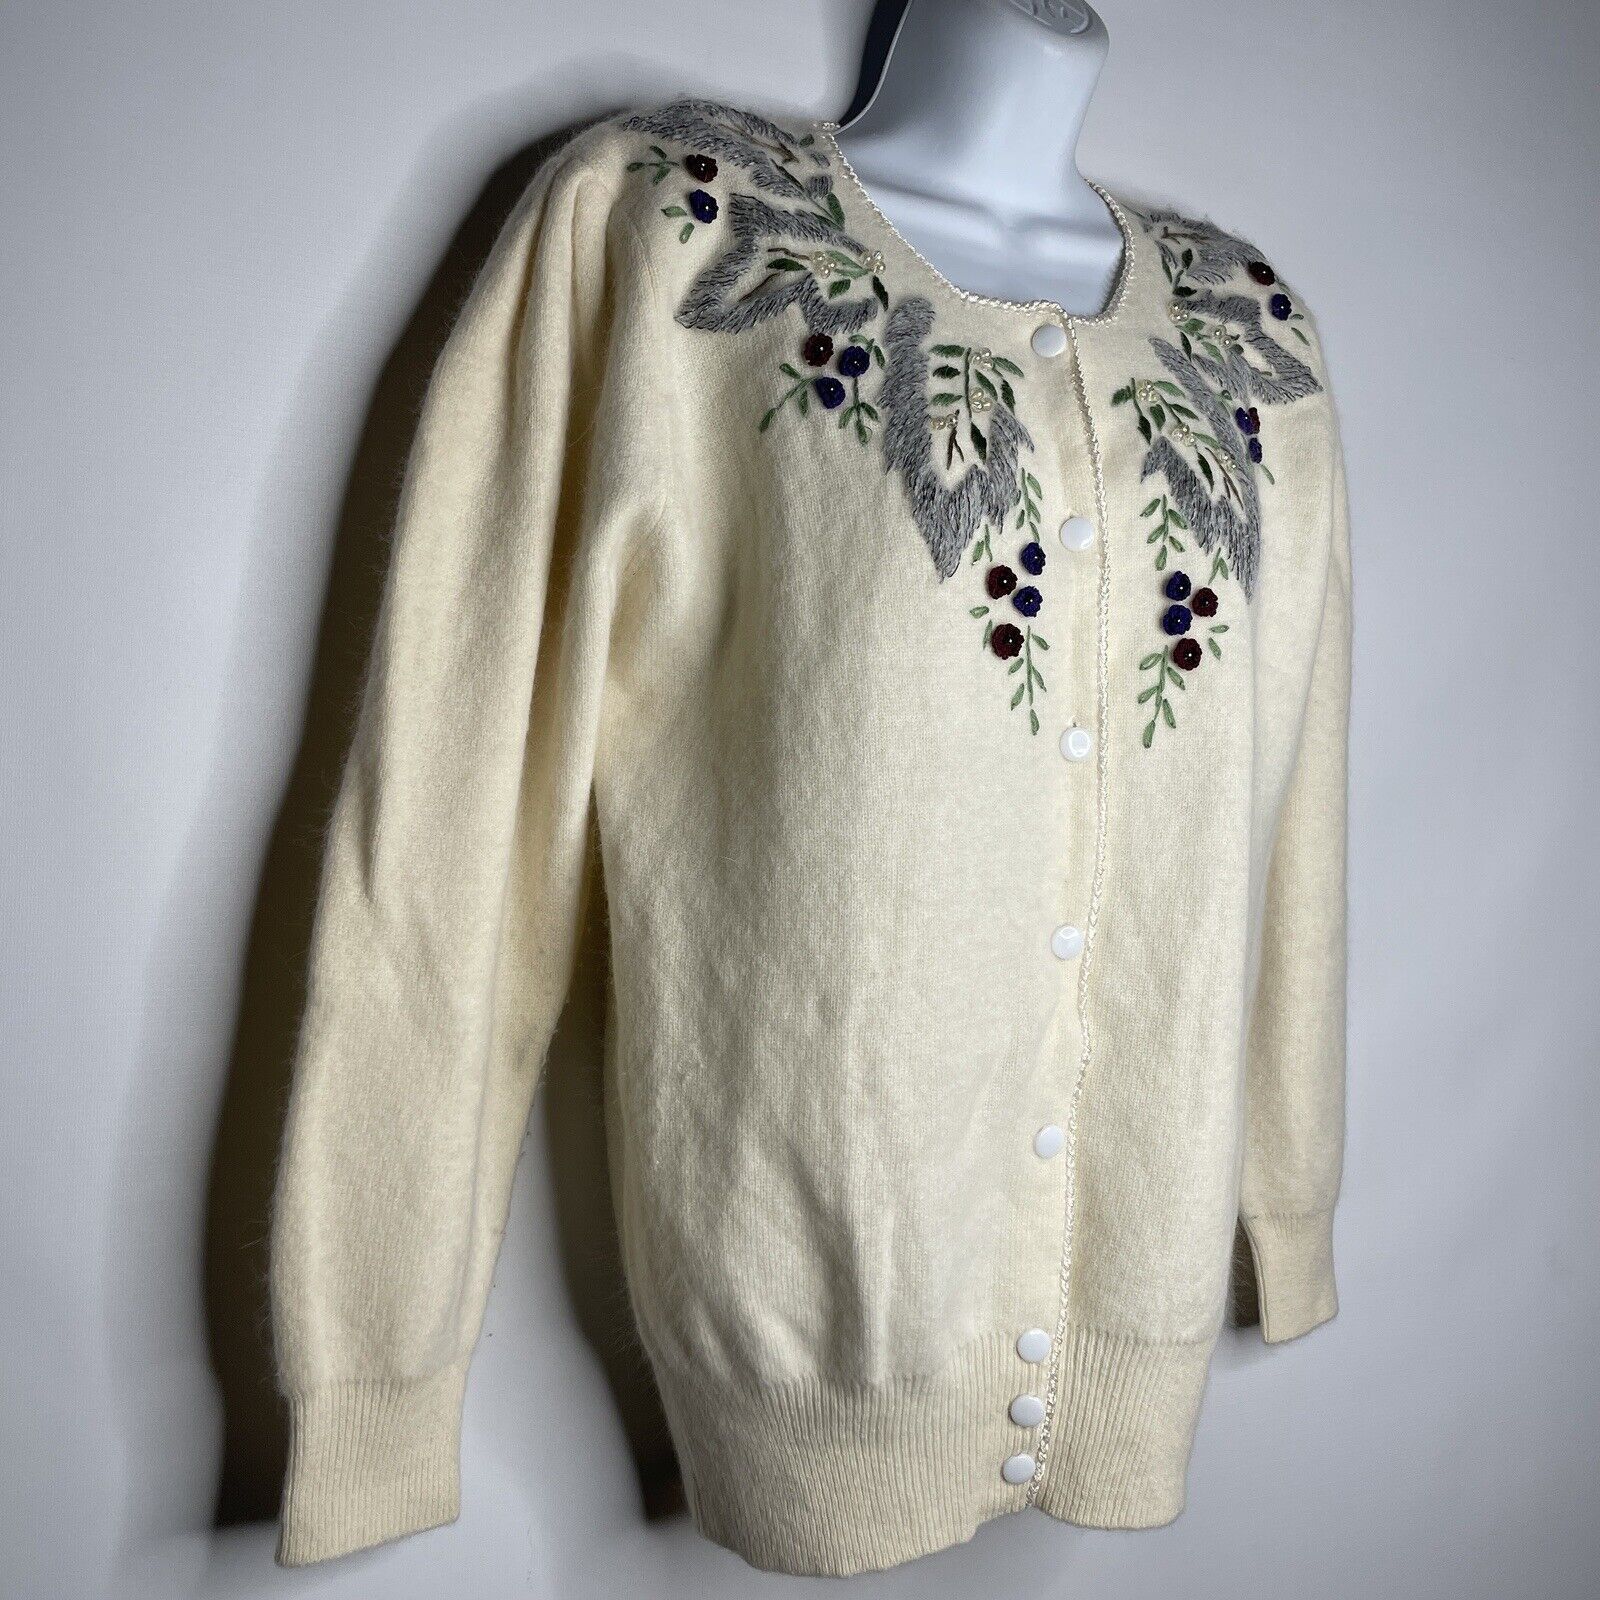 Vintage 80s Ivory Floral Embroidered Beaded Fuzzy Cardigan Sweater Size L / US 10 / IT 46 - 3 Thumbnail